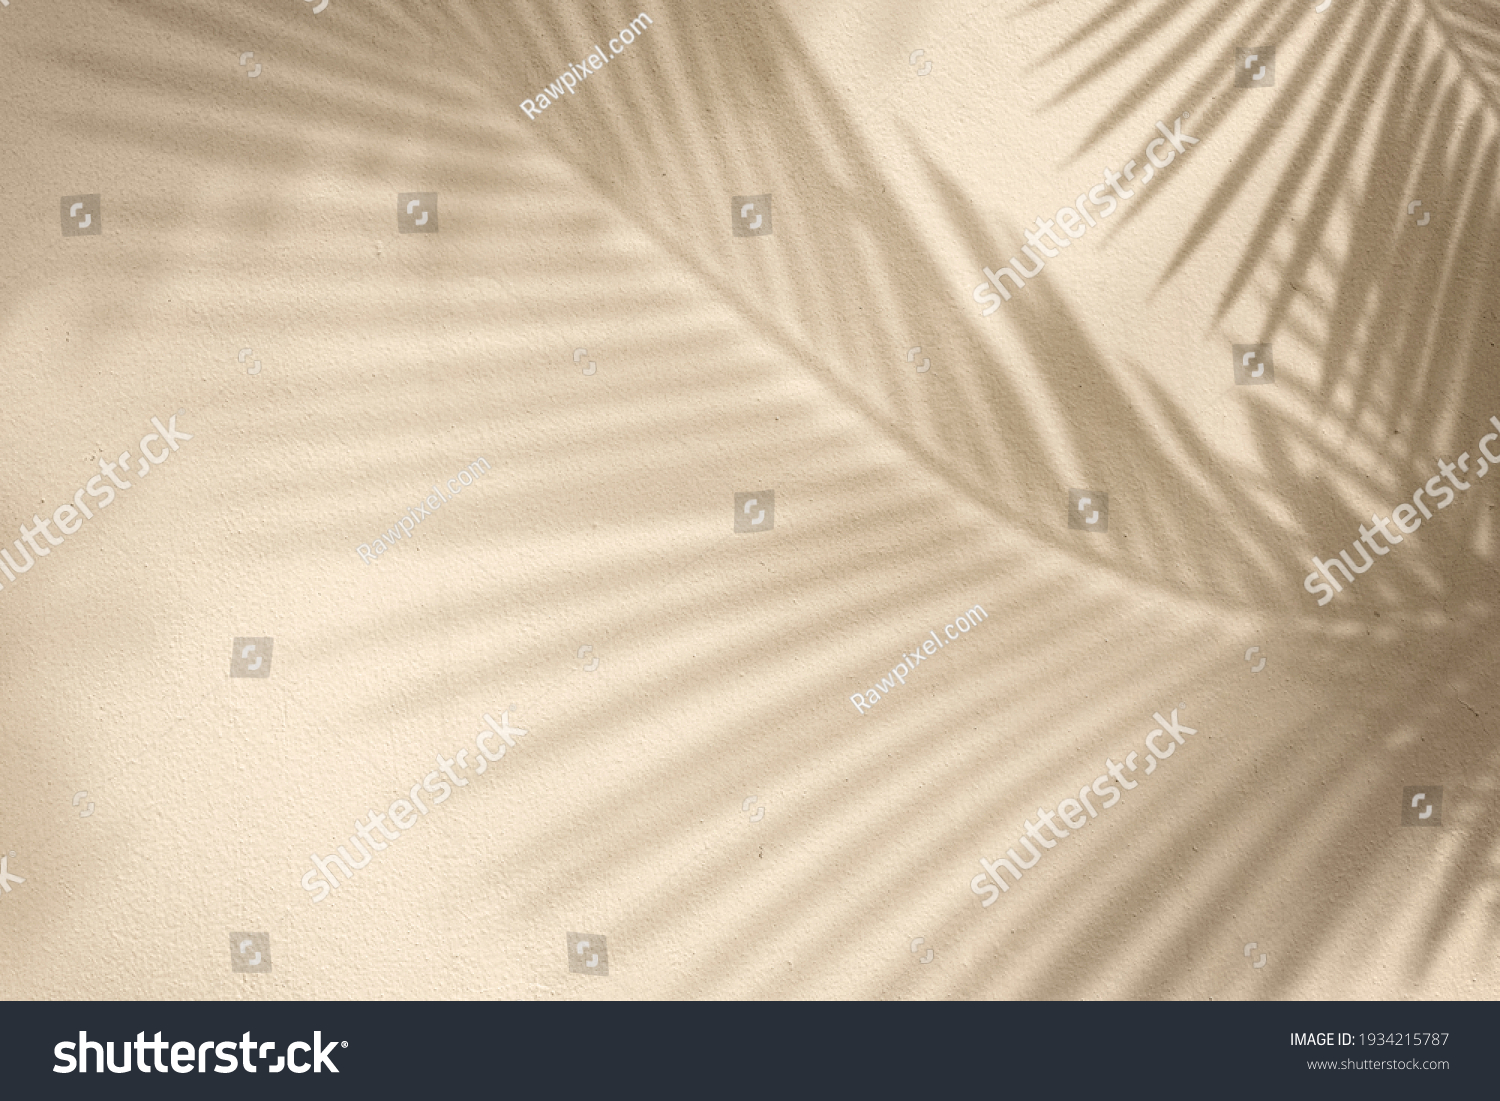 Golden background with palm tree #1934215787